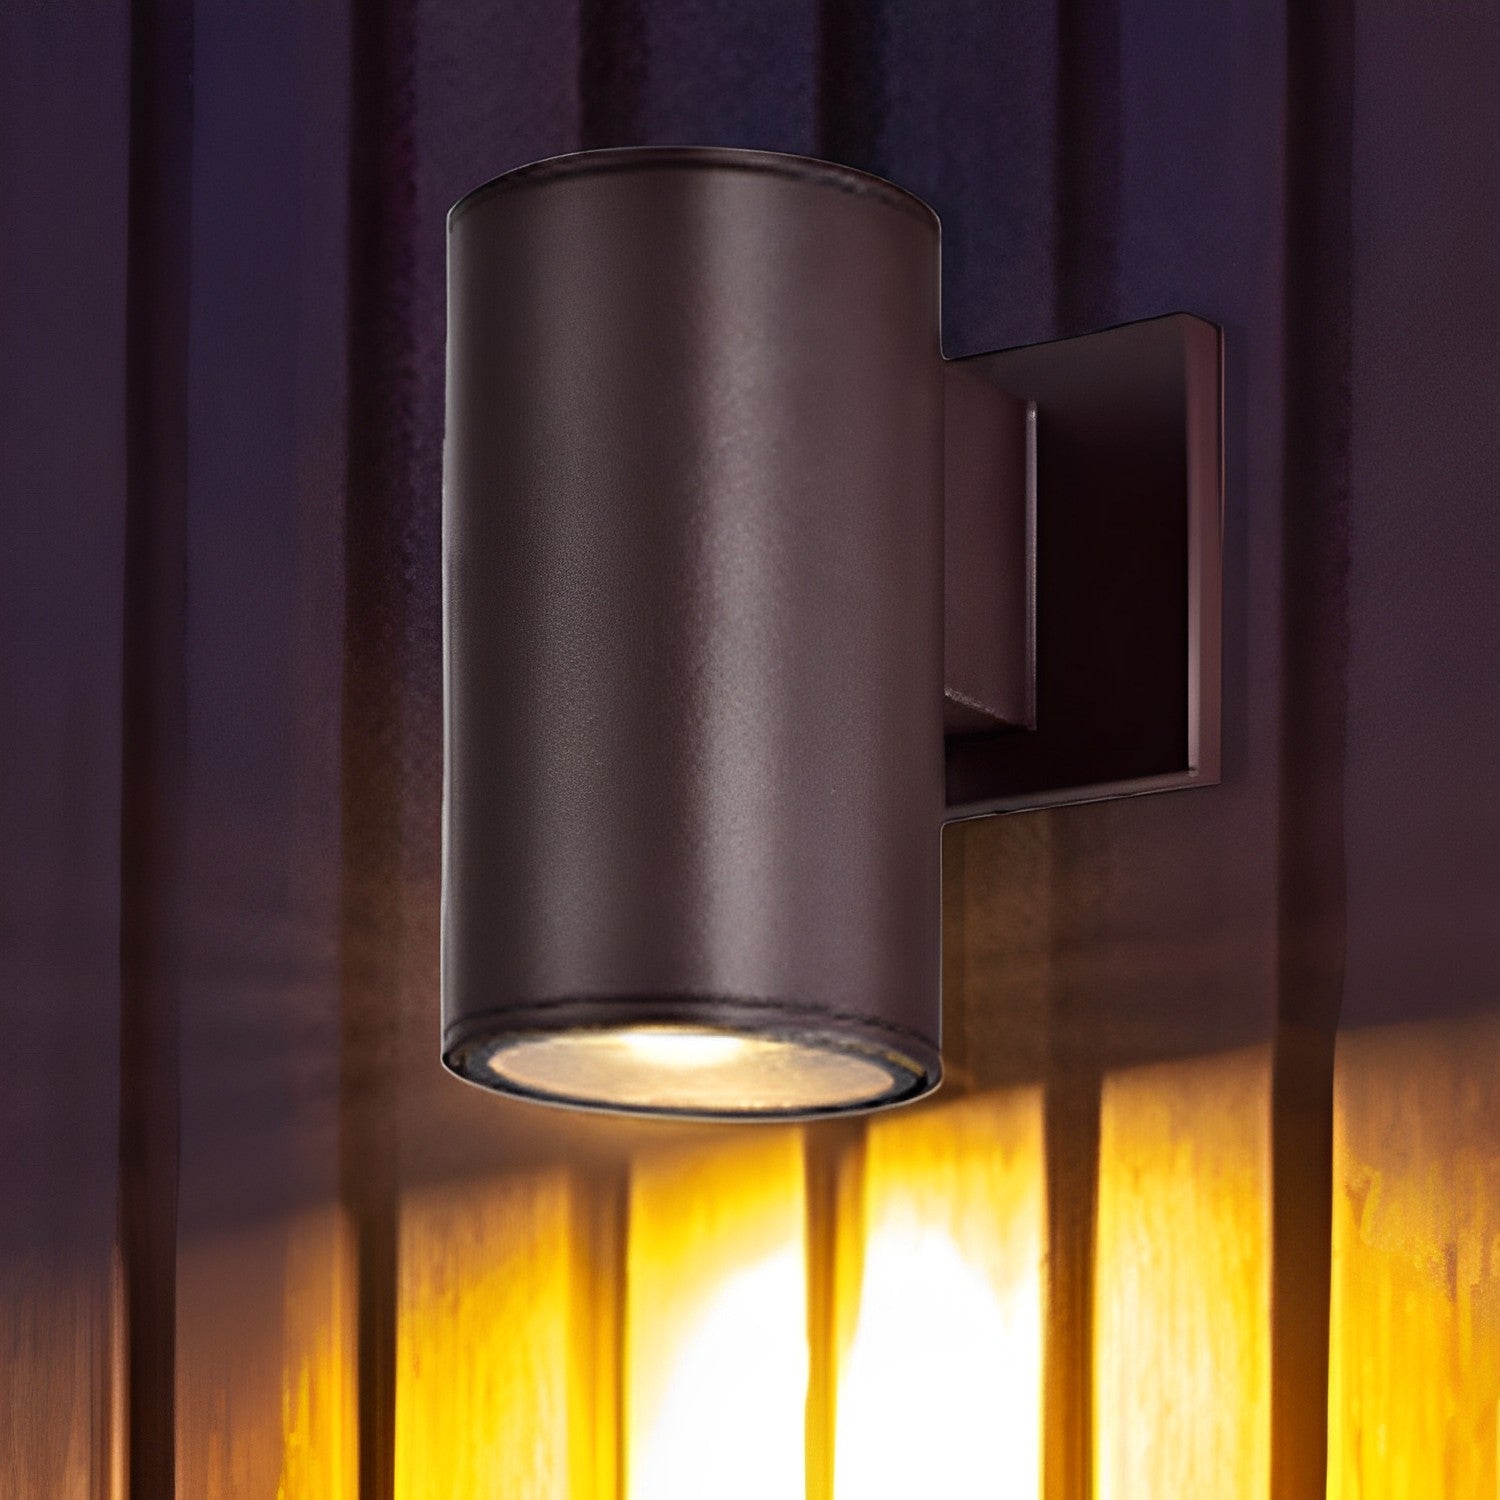 LED Rubbed Bronze Wall Sconce, Dusk to Dawn, 9W, Adam, 700 Lumens